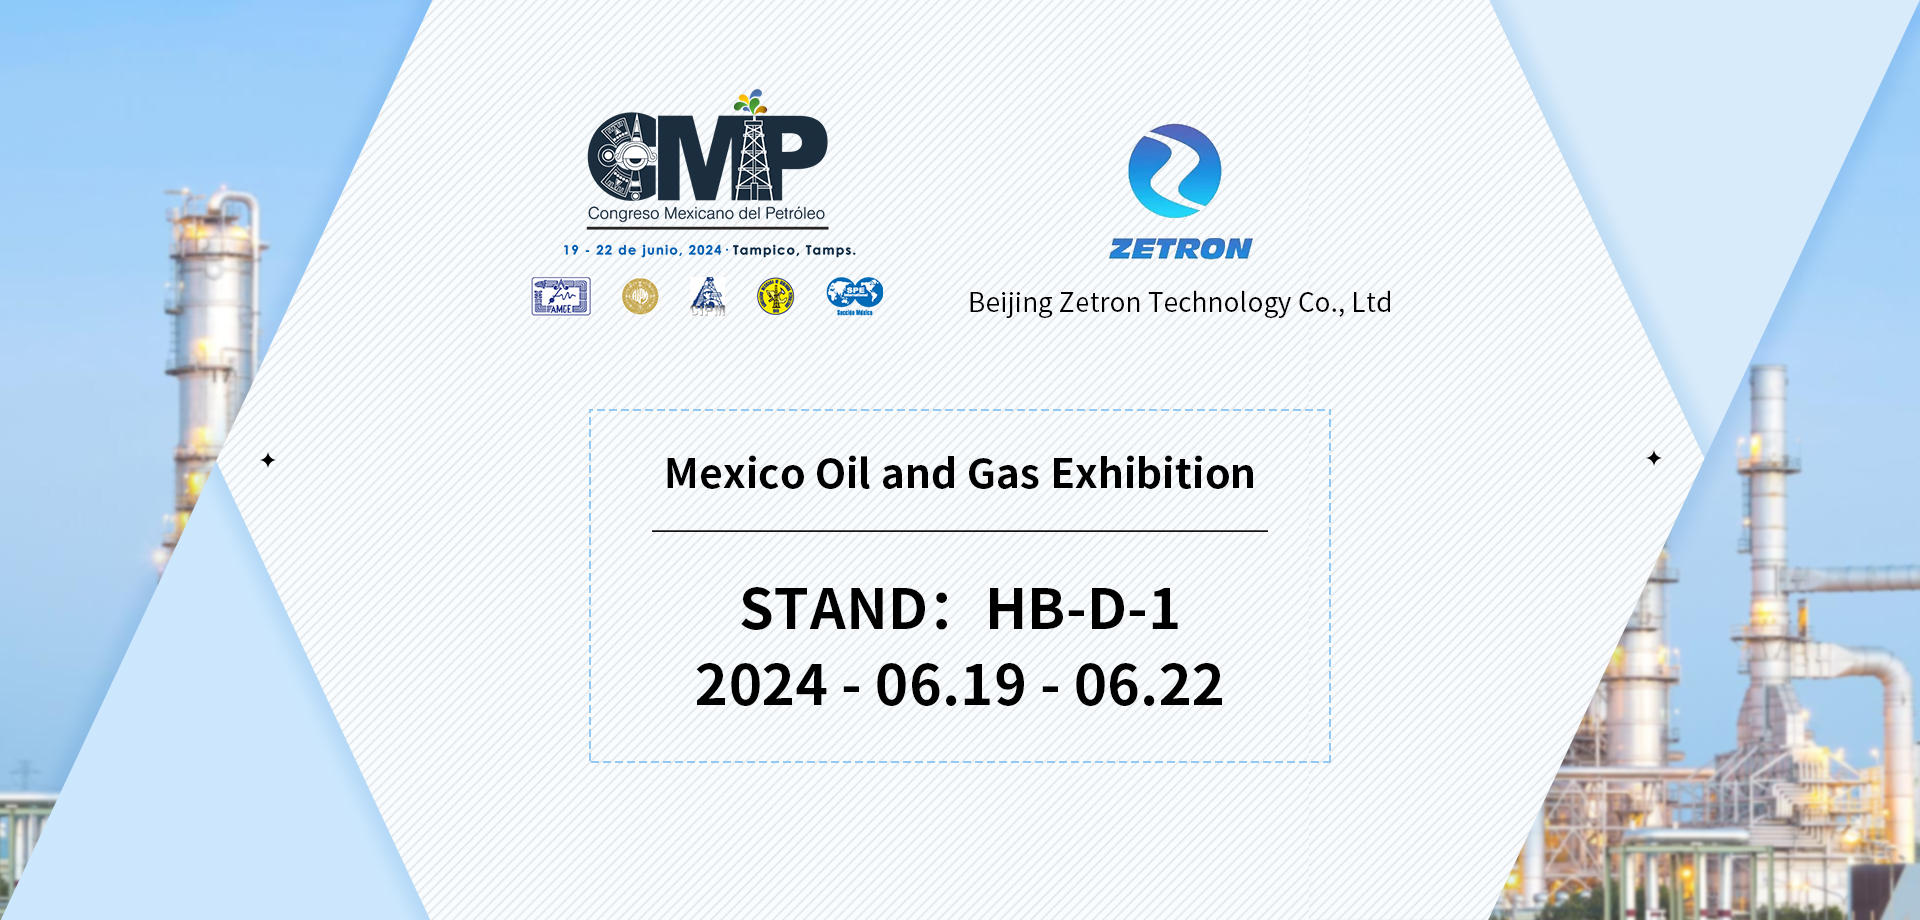 Mexico Oil and Gas Exhibition